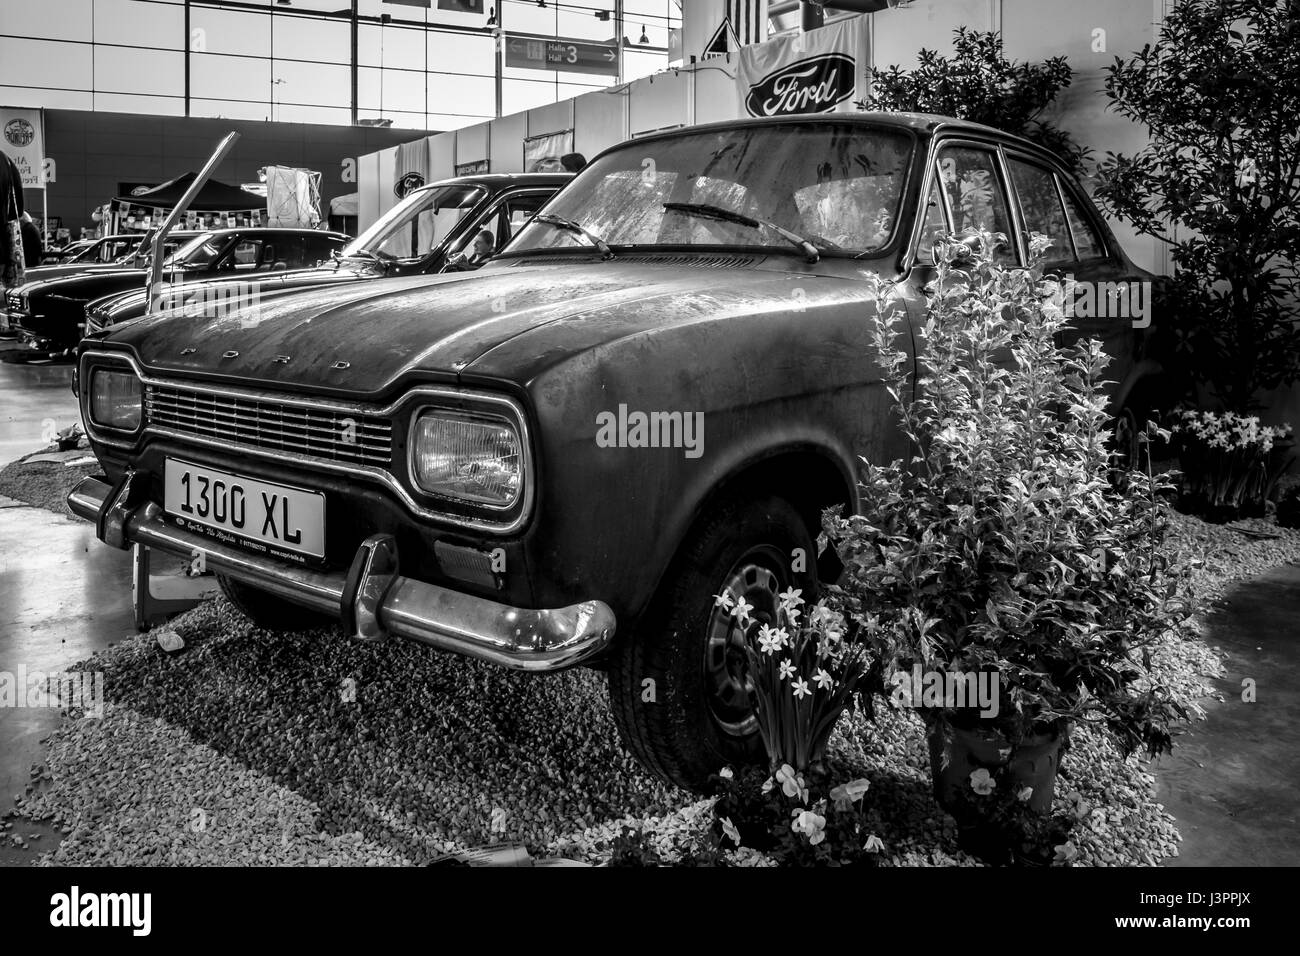 STUTTGART, GERMANY - MARCH 03, 2017: Small family car Ford Escort MK1 1300 XL, 1970. Black and white. Europe's greatest classic car exhibition 'RETRO CLASSICS' Stock Photo